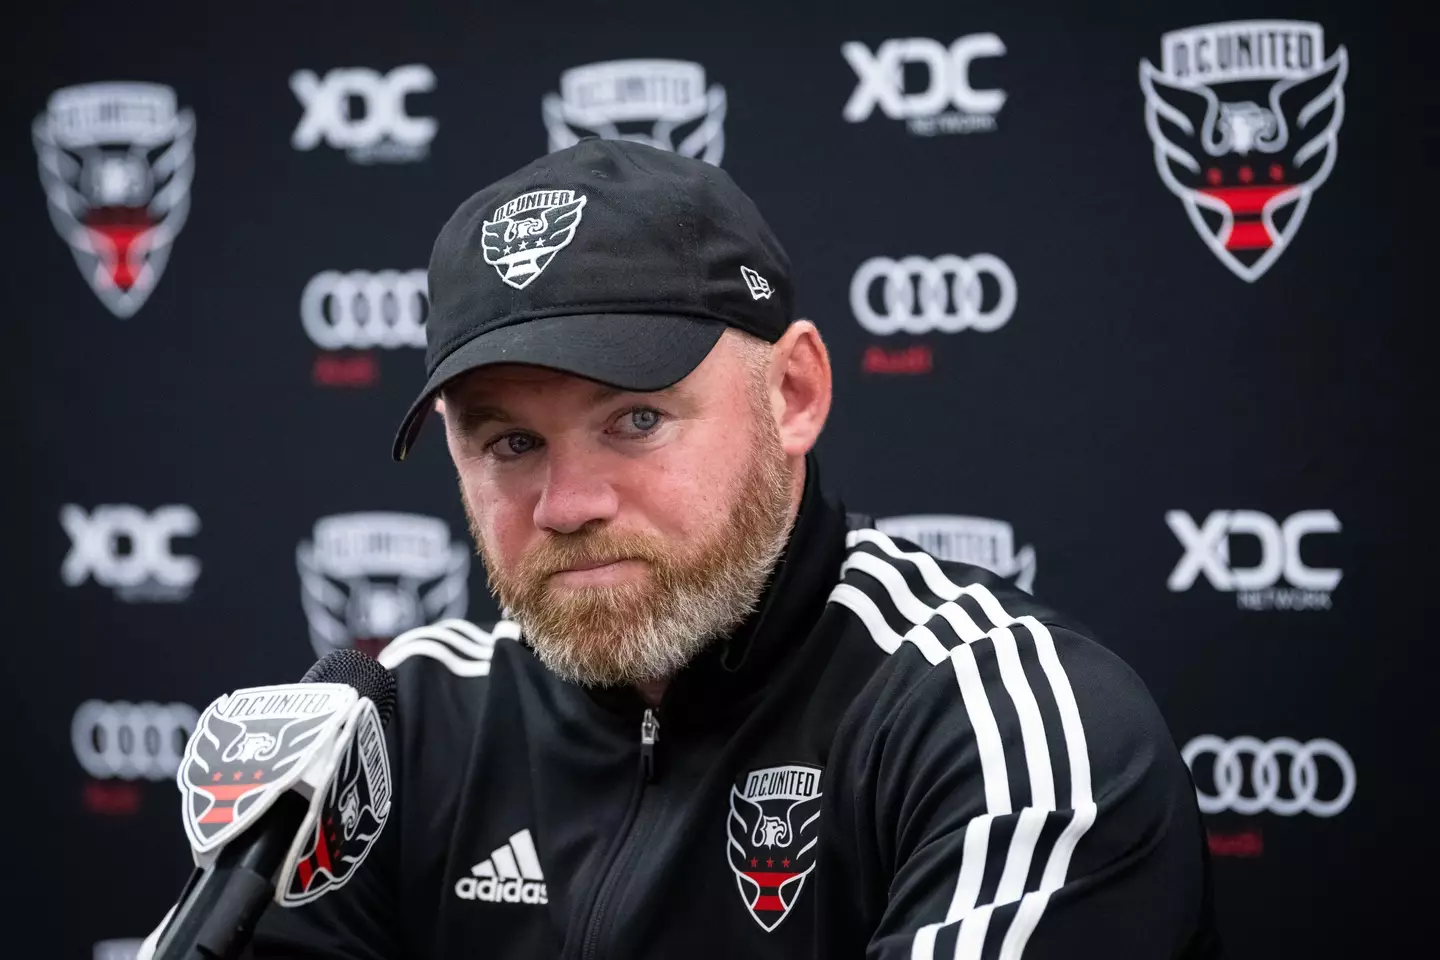 Wayne Rooney, DC United manager...you're still thinking about his small pecker aren't you? (Image: Alamy)